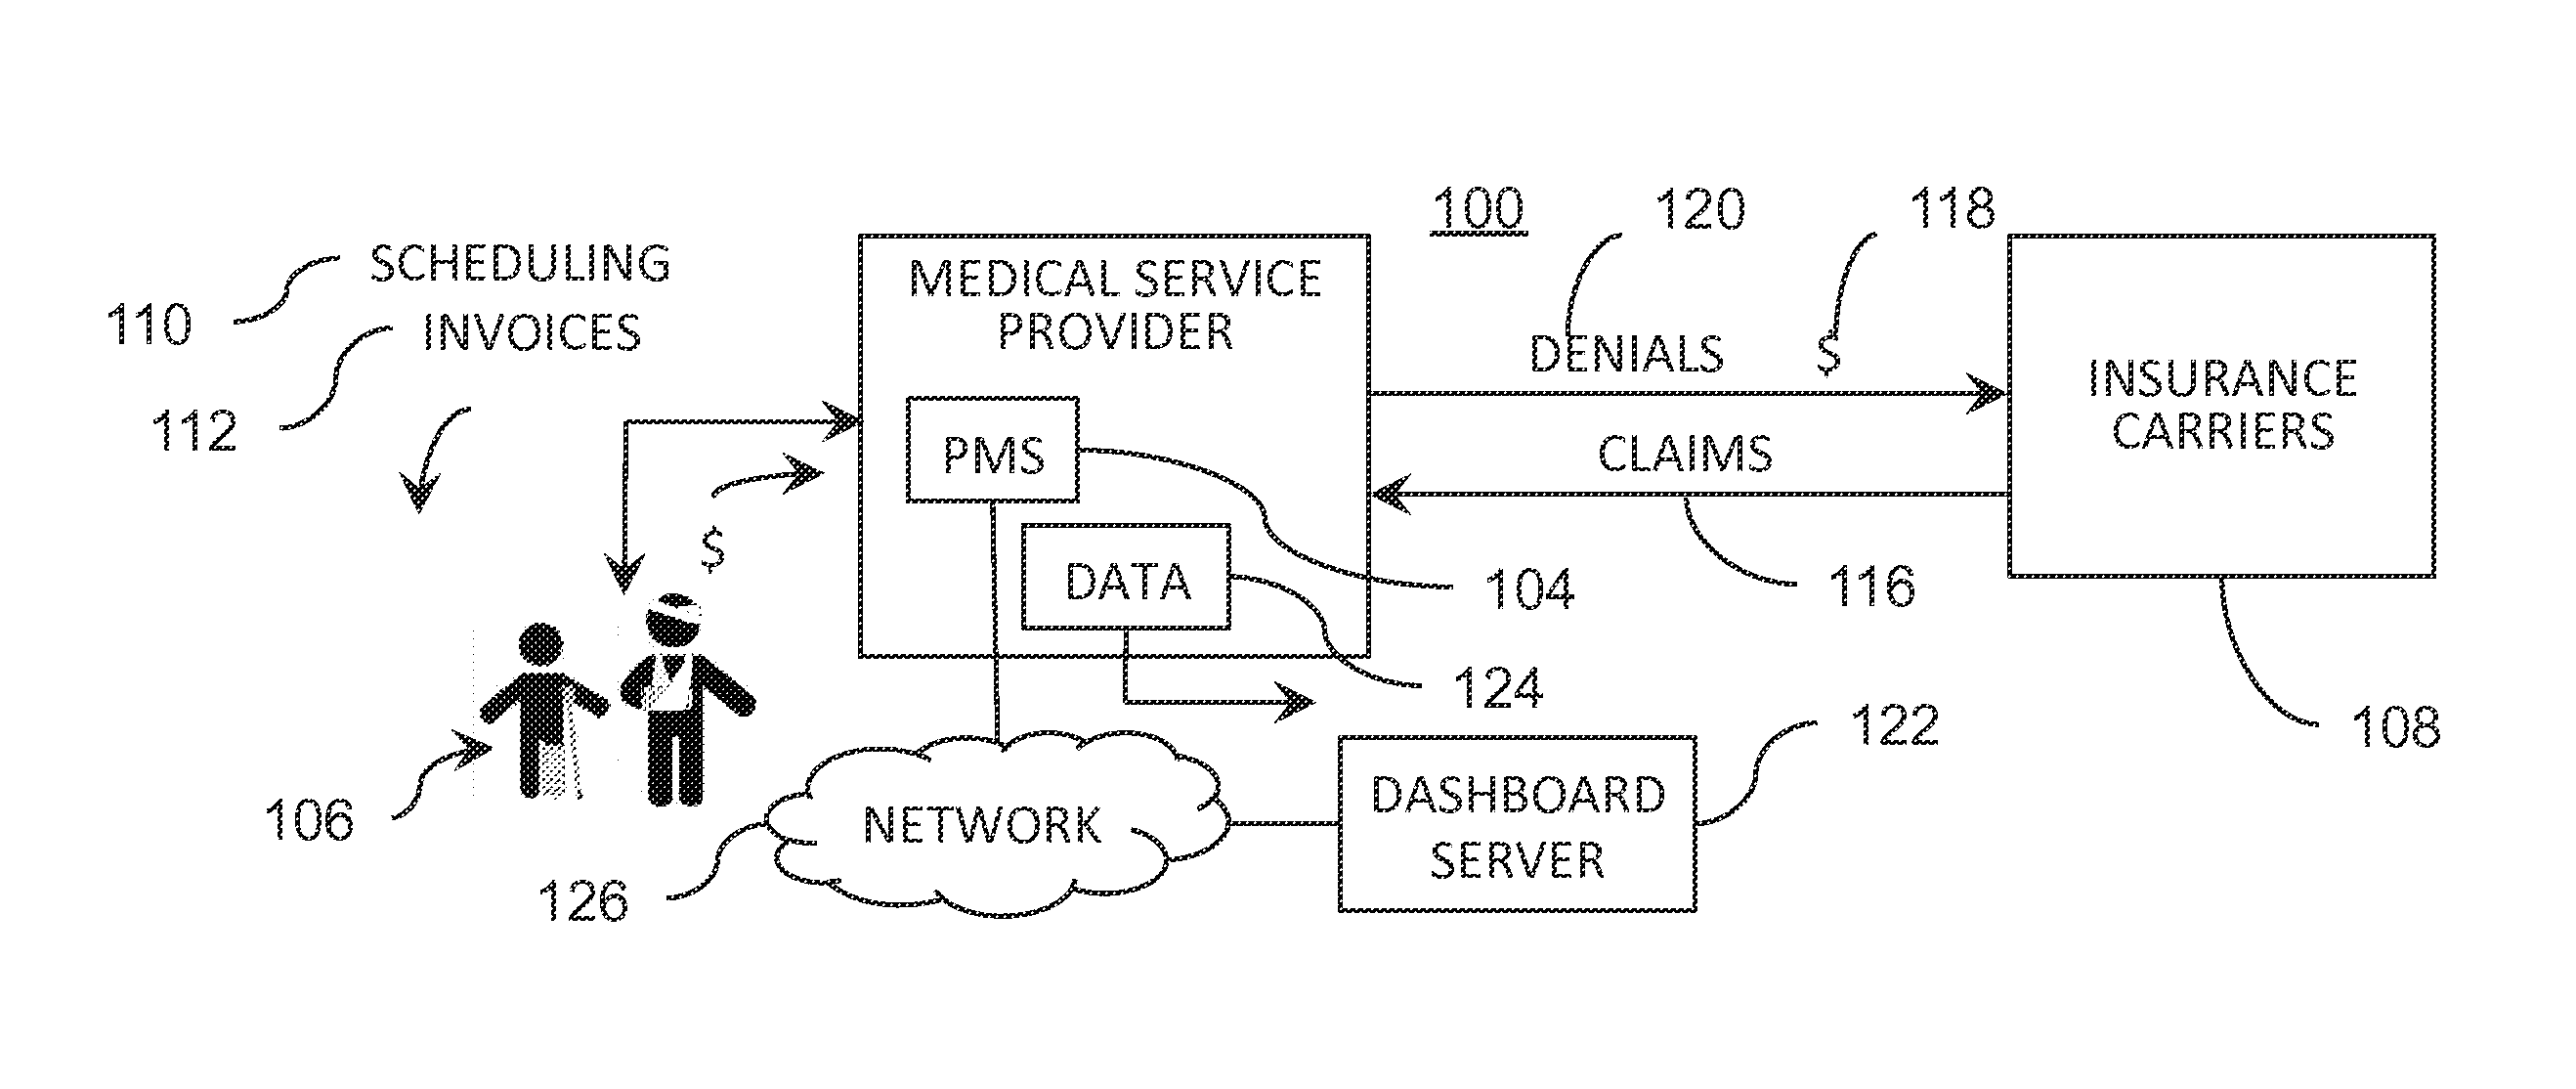 System and Method for Analyzing Revenue Cycle Management